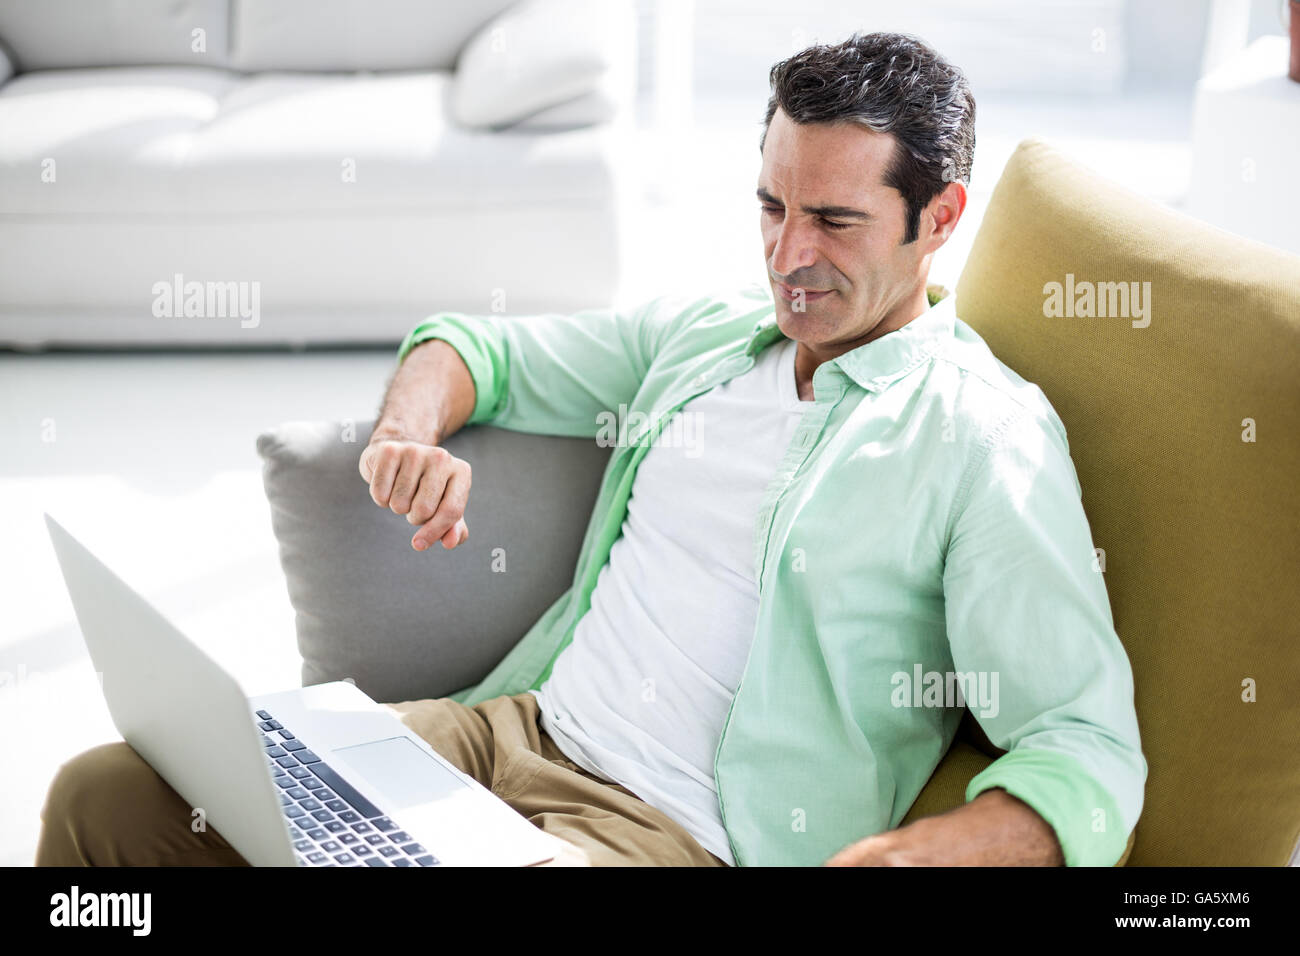 Man using laptop while siting on couch Stock Photo